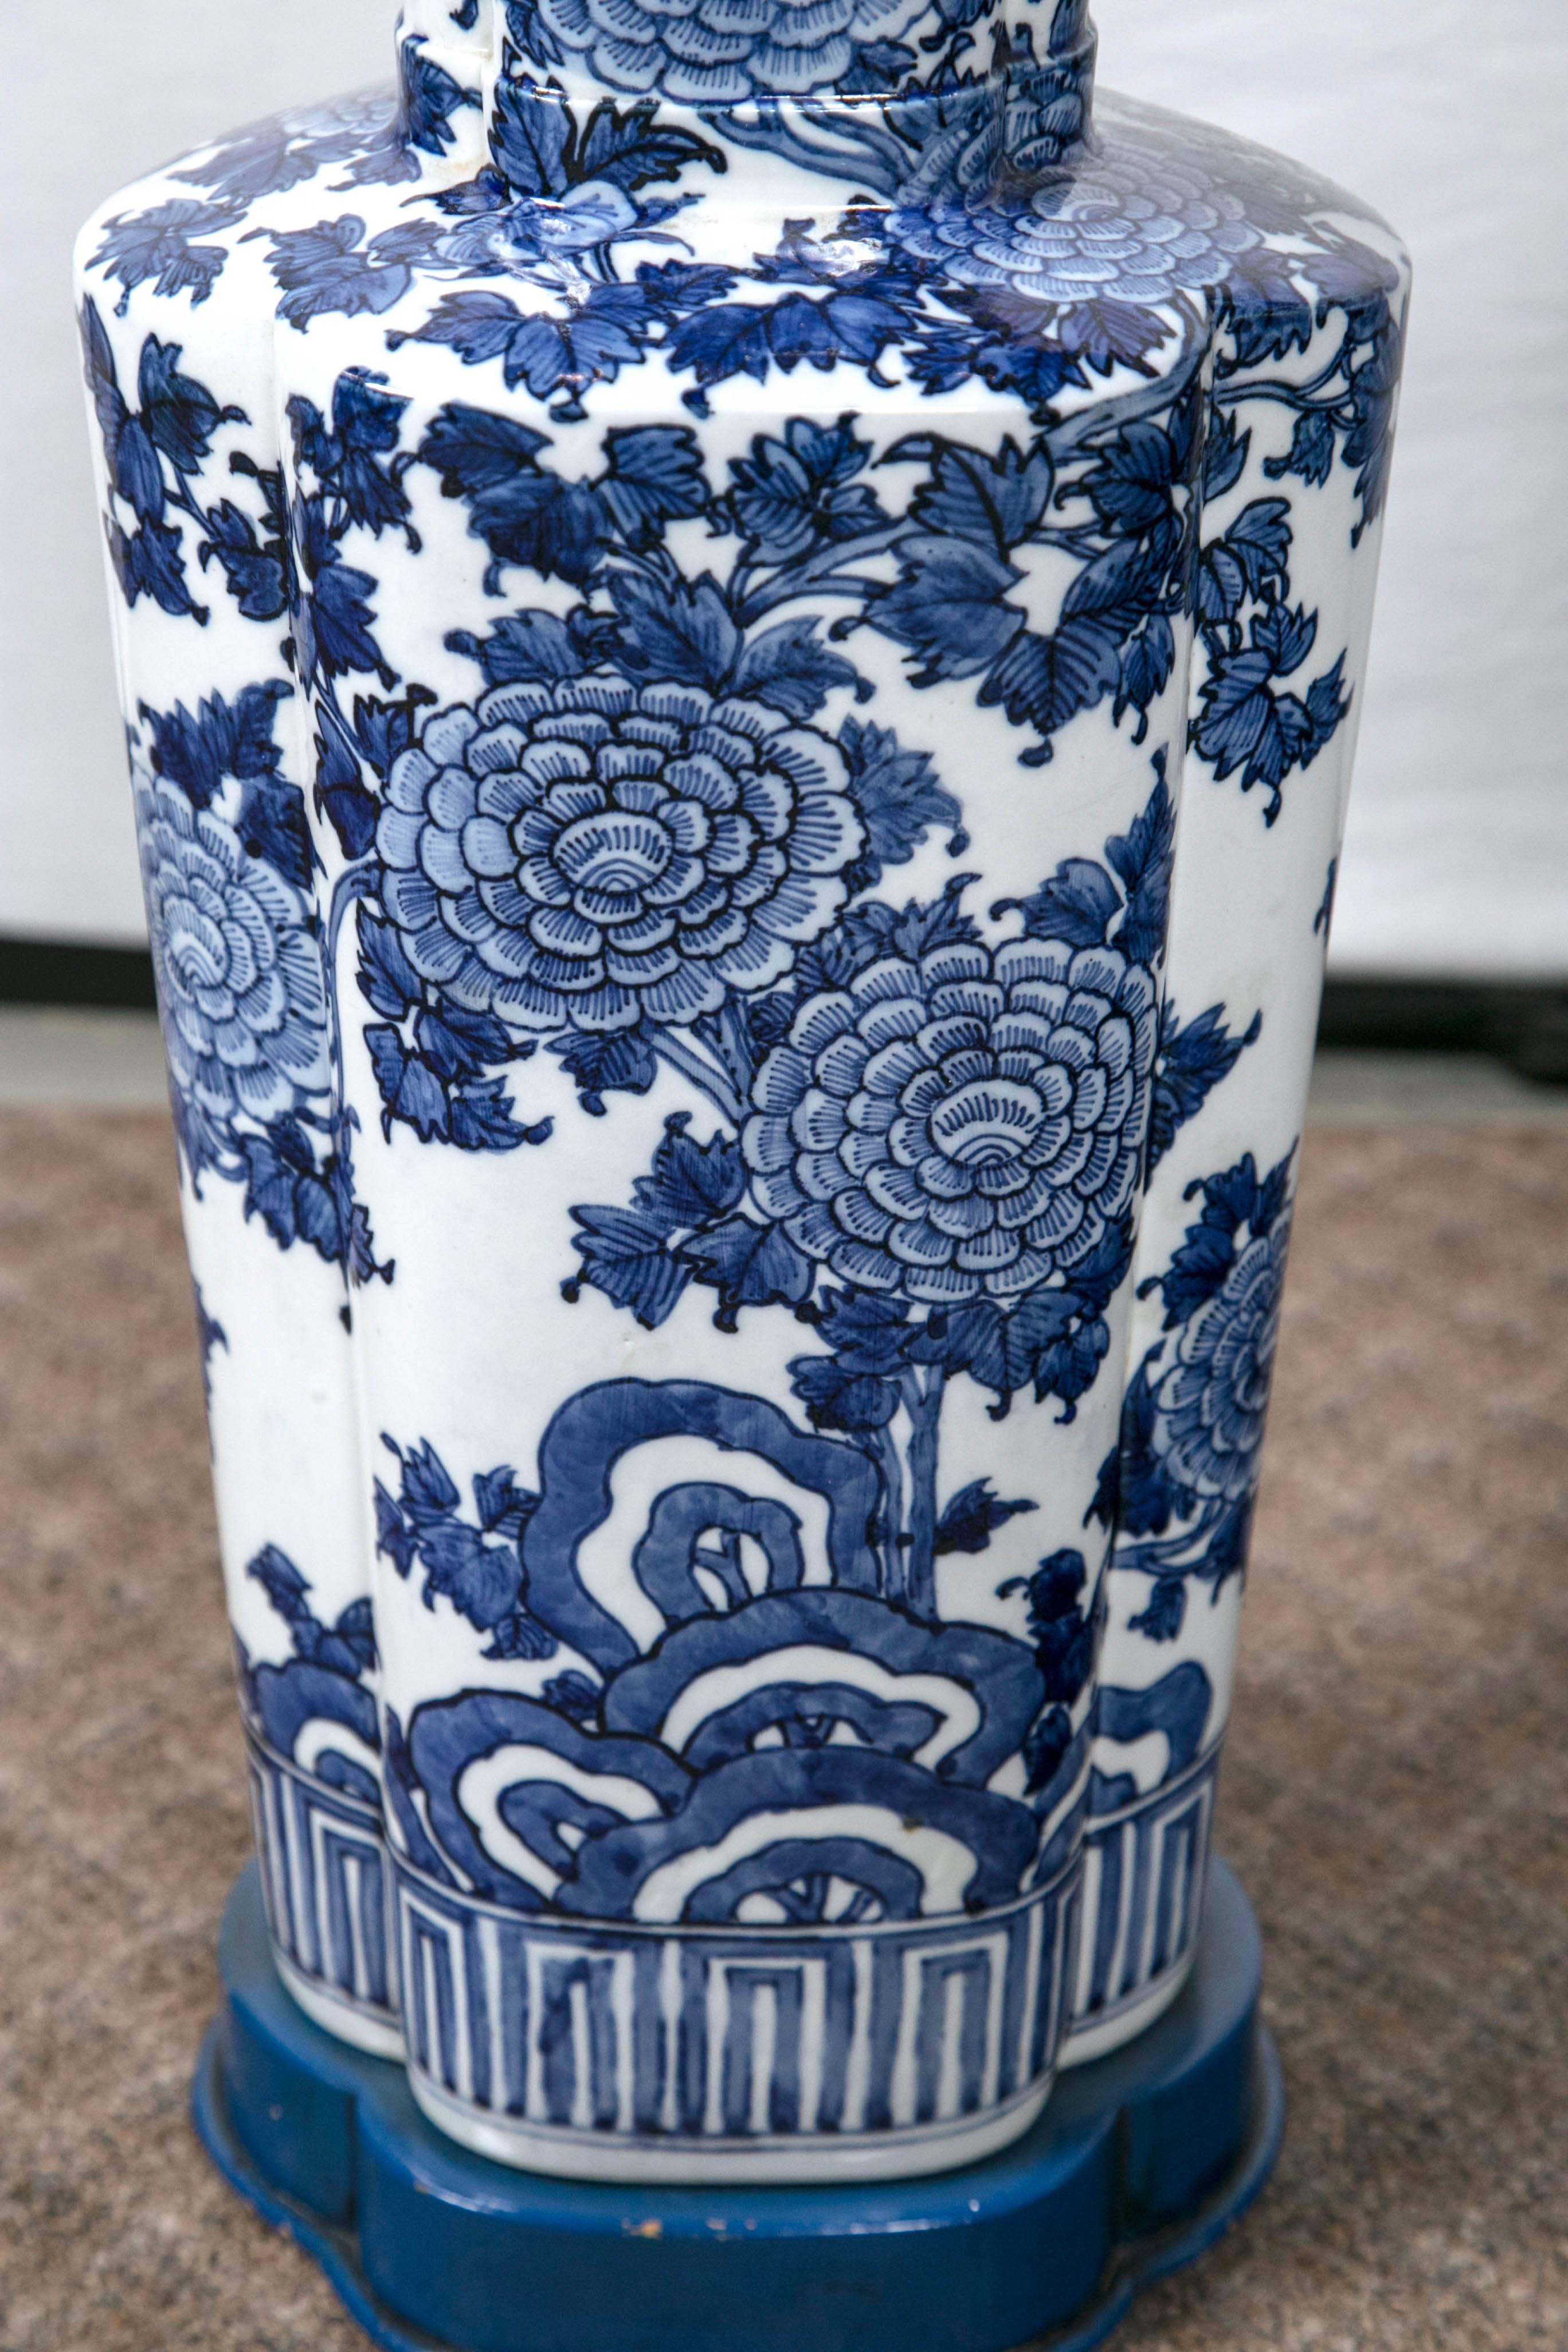 A lovely pair of blue and white porcelain Asian style lamps. Great finials.